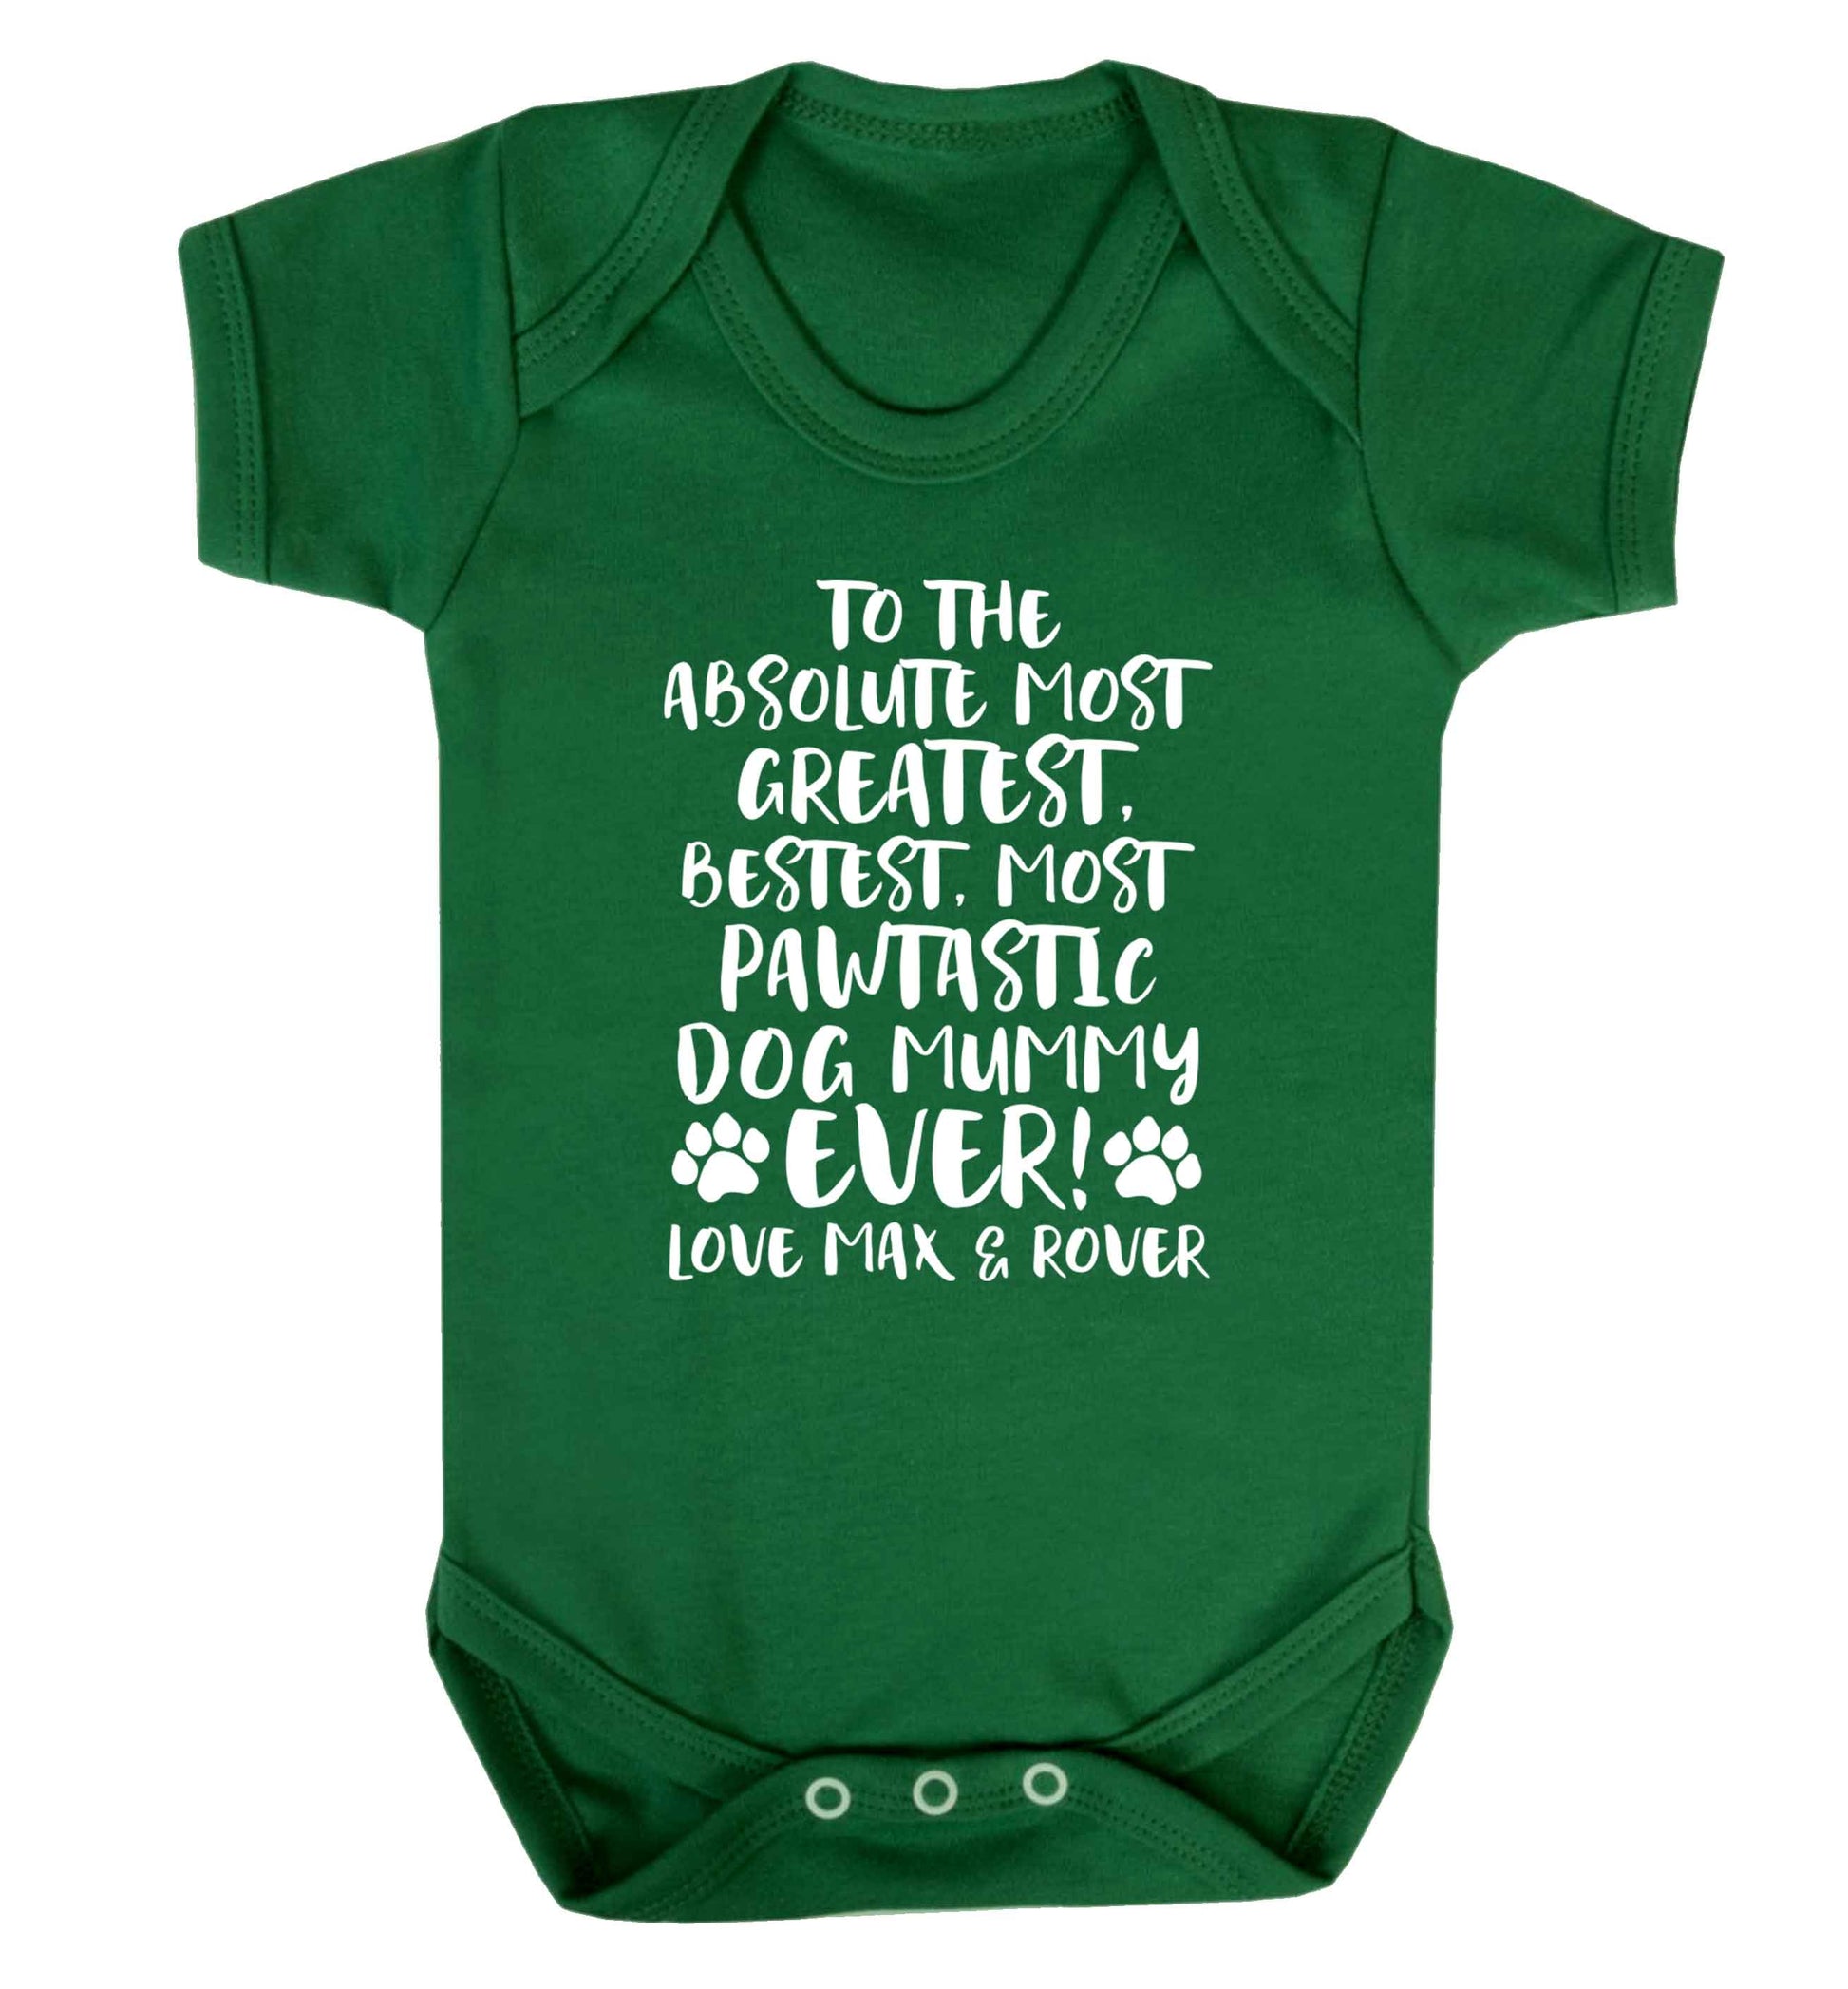 Personalsied to the most pawtastic dog mummy ever Baby Vest green 18-24 months